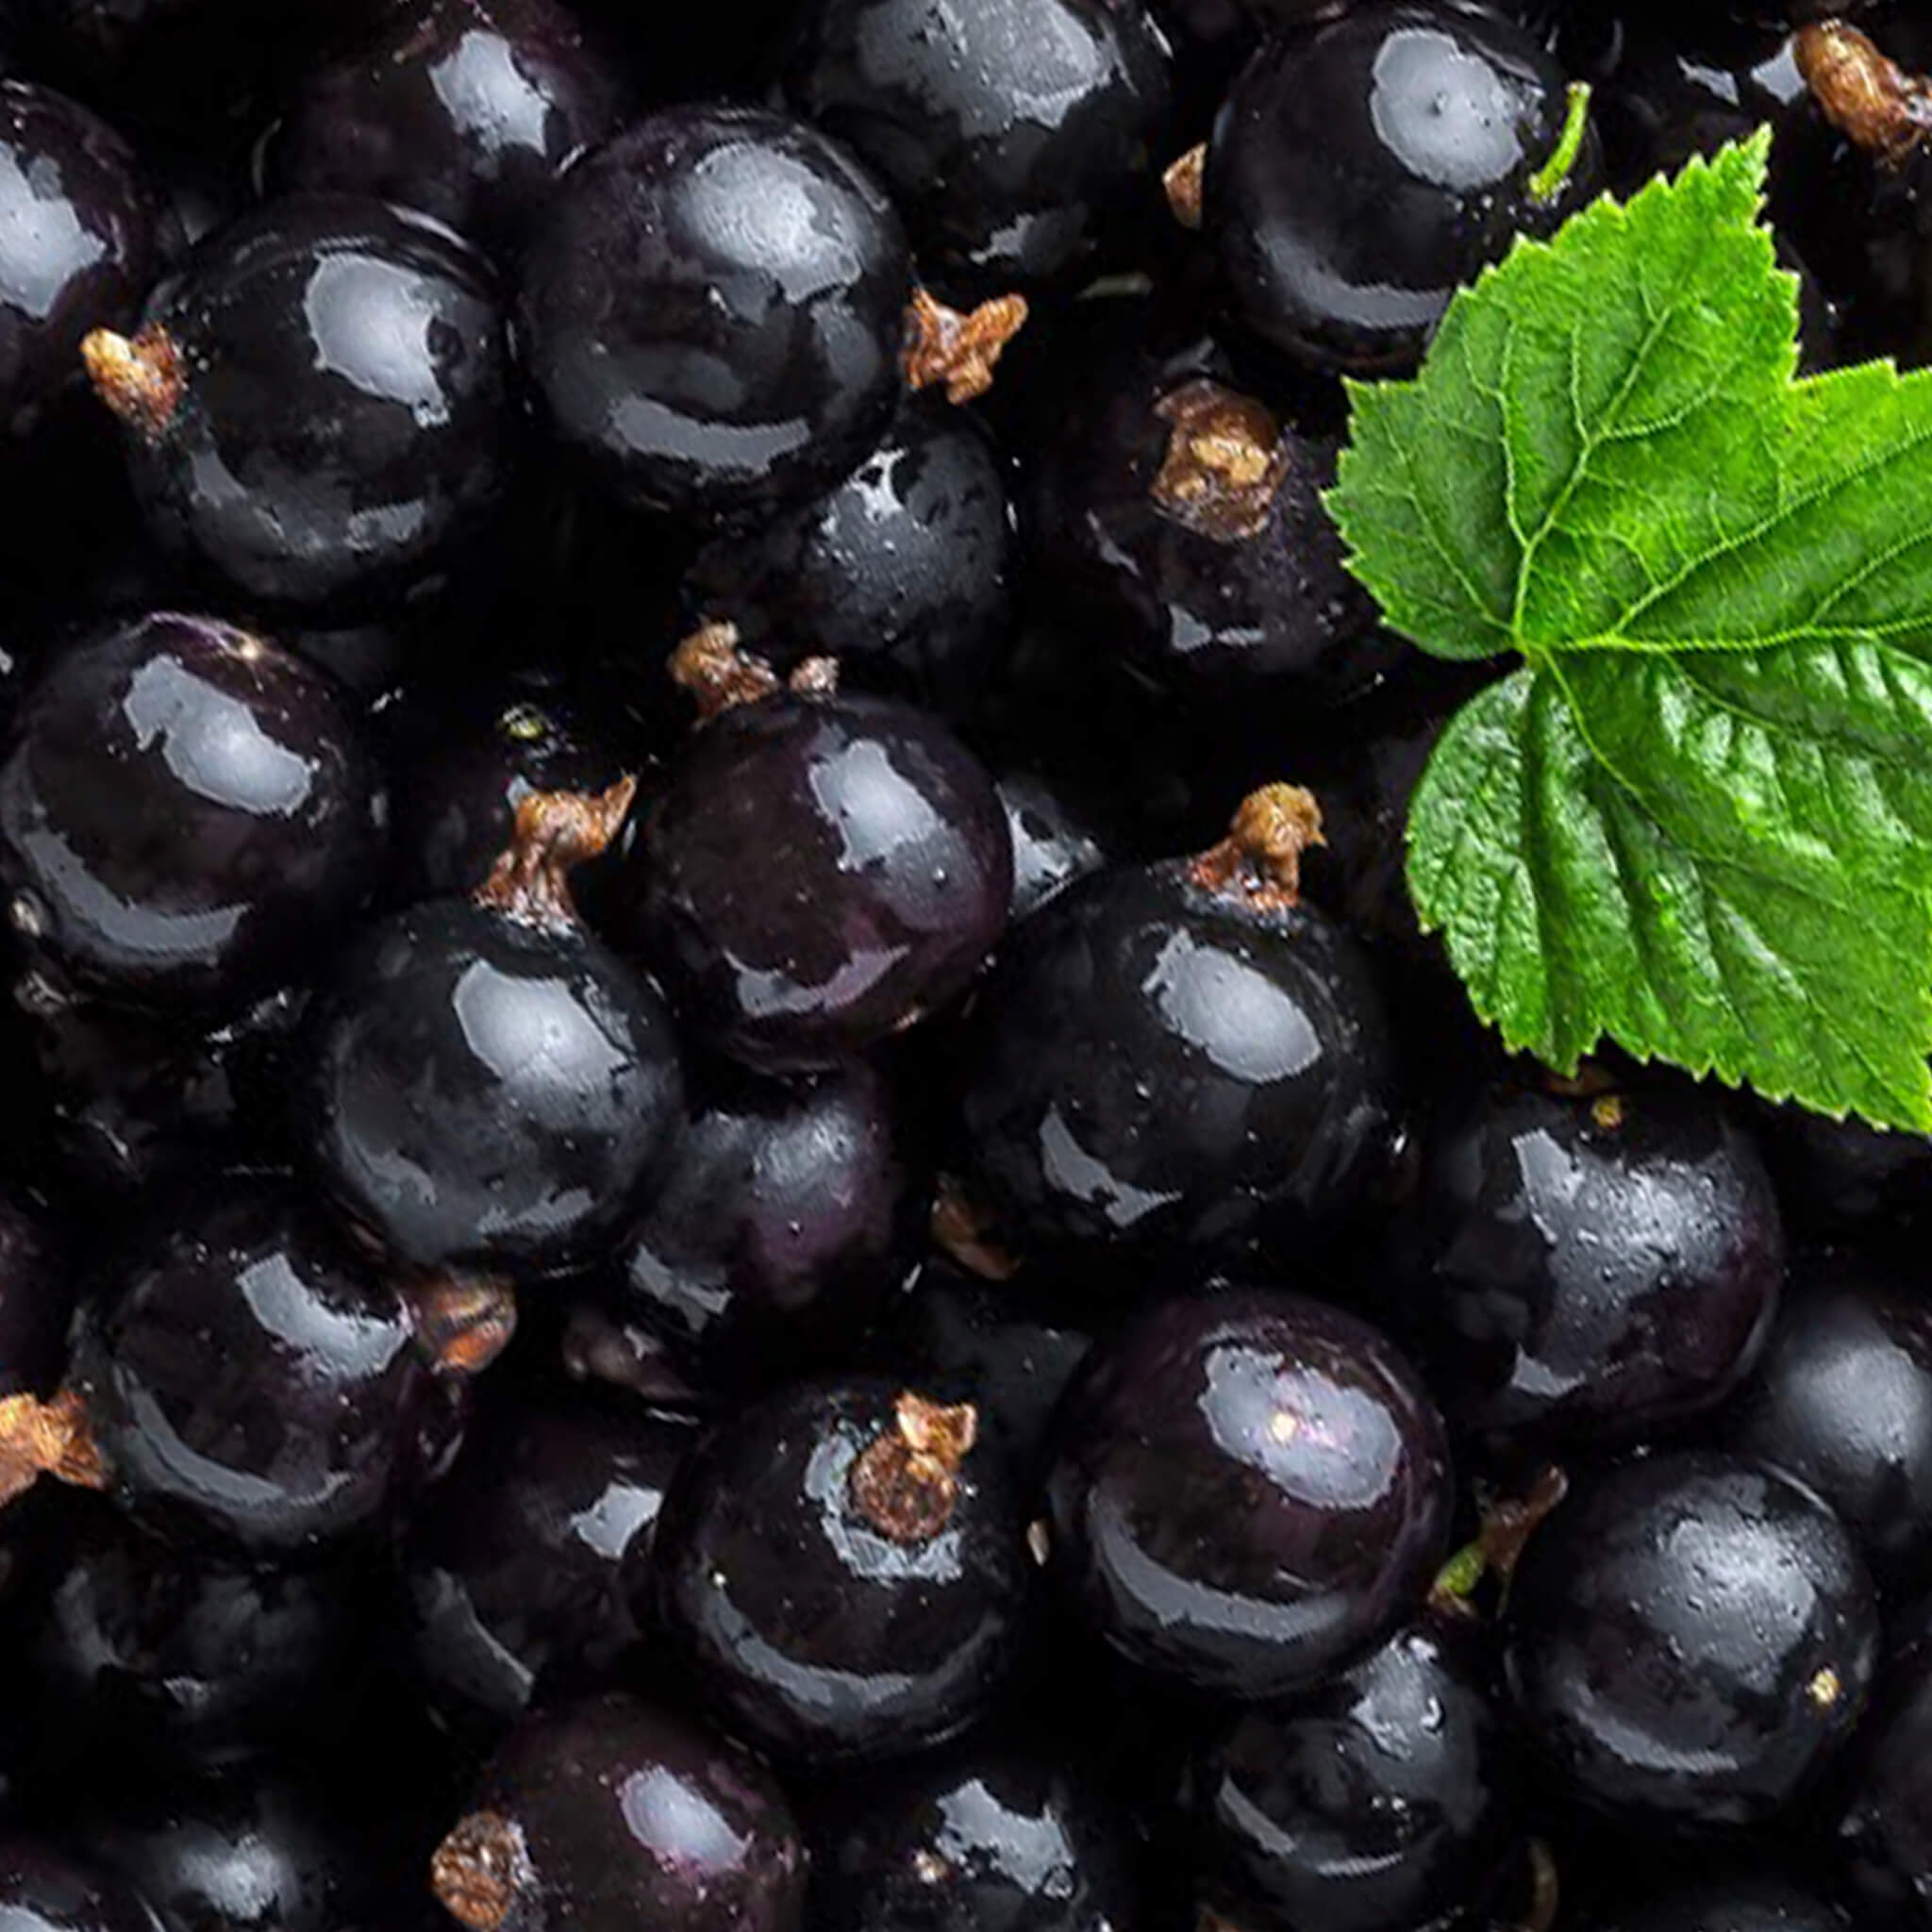 Product Page Key Ingredients: Black Currant